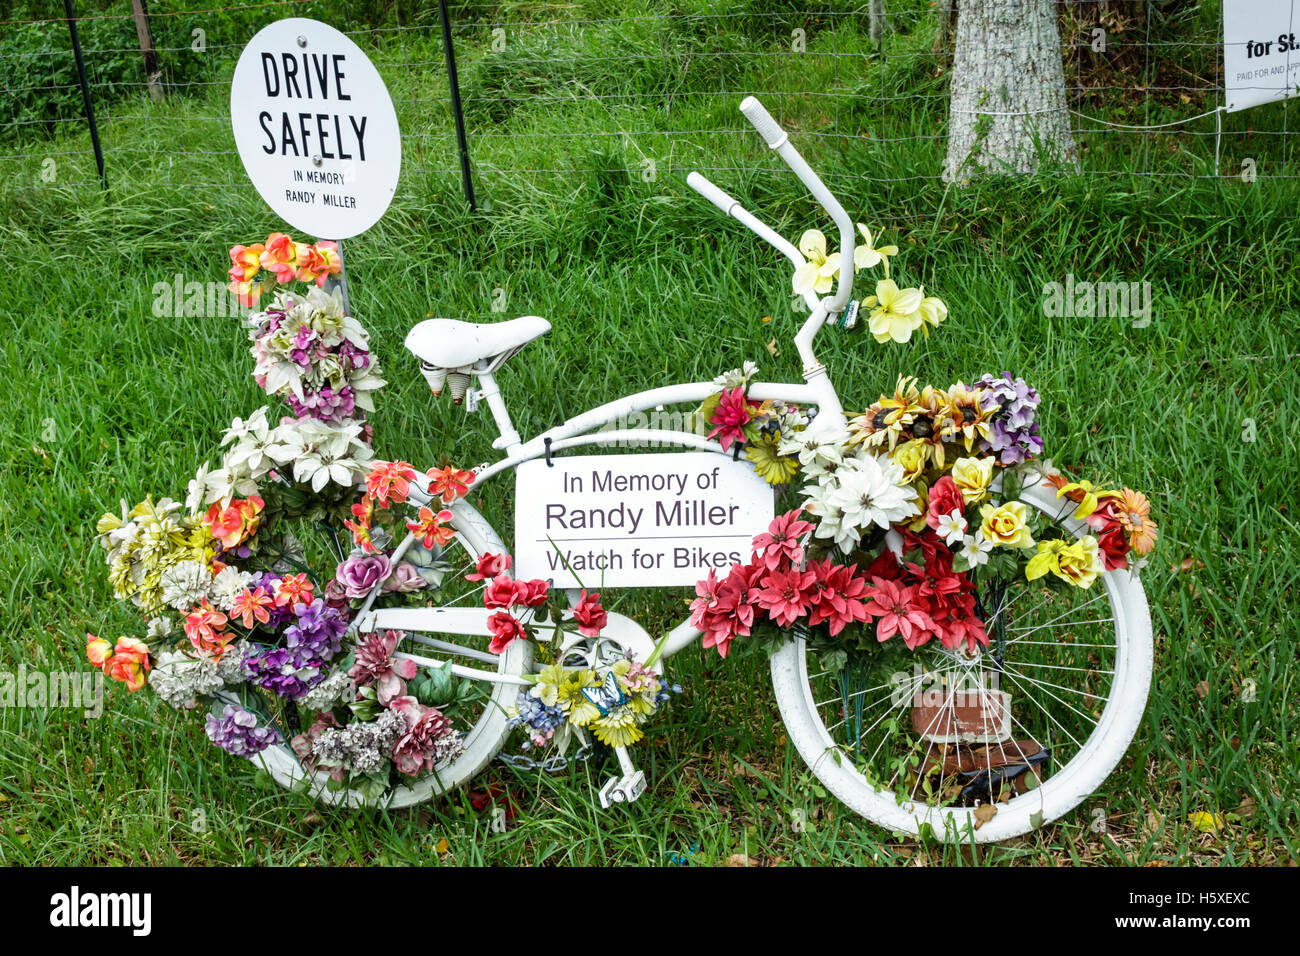 St. Saint Augustine Florida,roadside side road memorial bike traffic accident death site bicycle Stock Photo